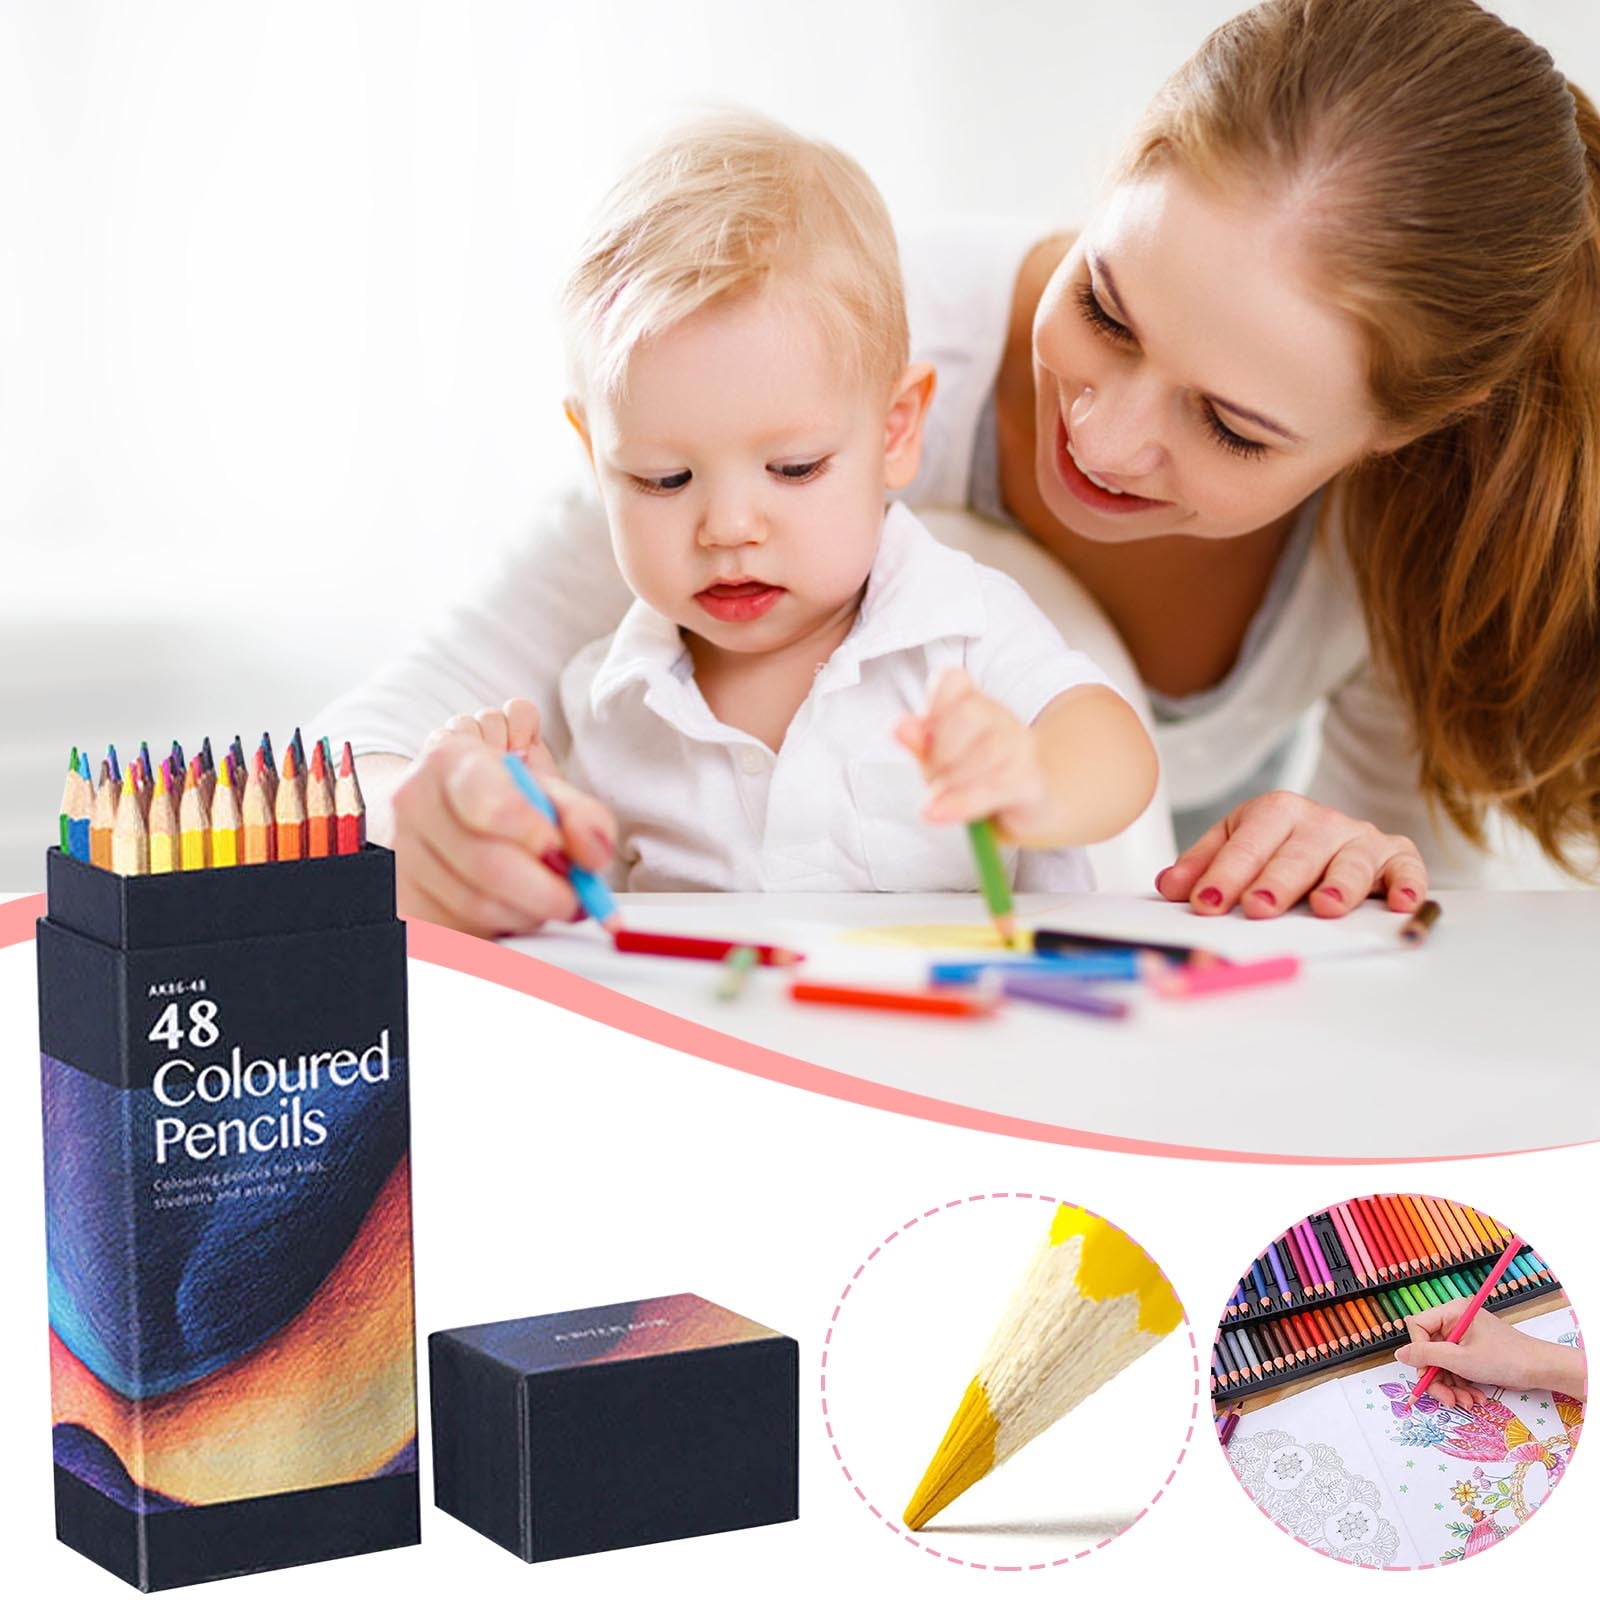 ThEast 48 Colored Pencils, Color Pencils for Adult Coloring Book, Artist  Soft Core Oil based Color Pencil Sets, Included Sharpener, Handmade Canvas